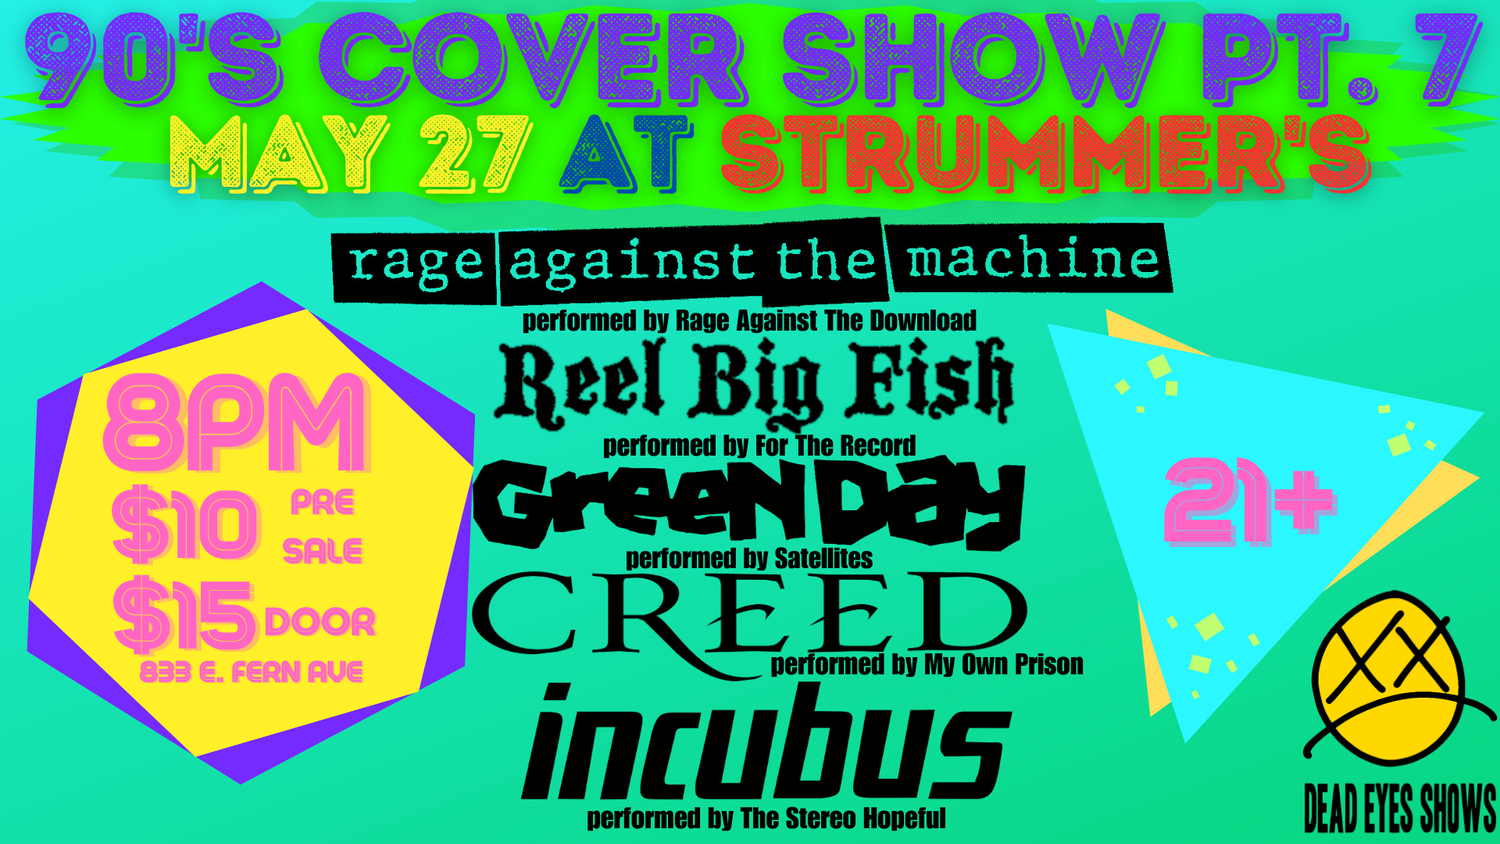 90's Cover Show [CANCELLED] at Strummers